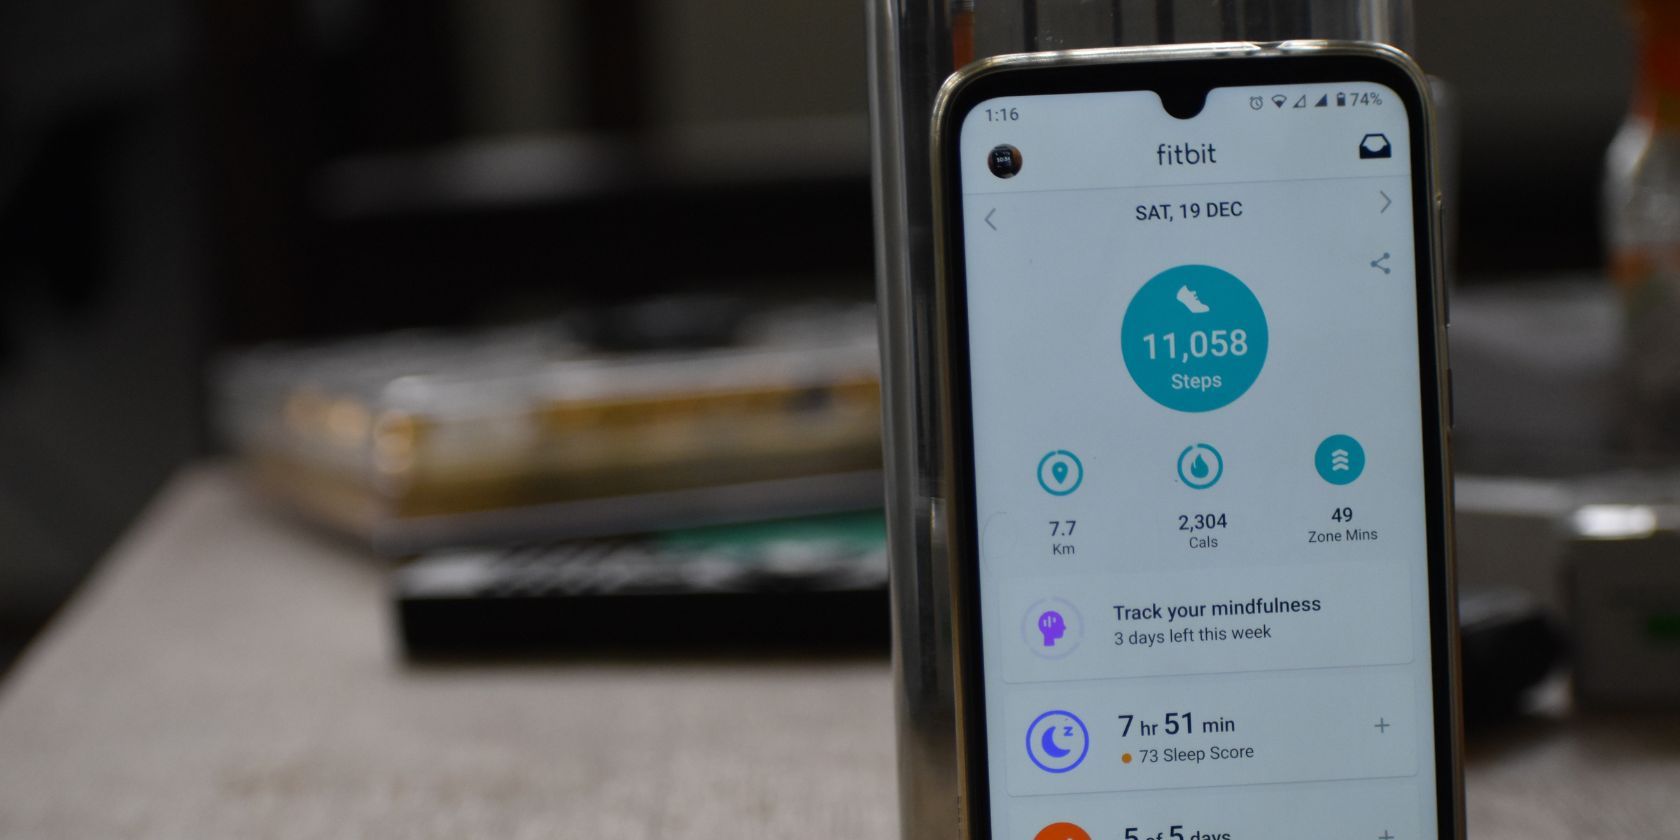 fitbit app pulled up on a smartphone showing over 11,000 steps in a day